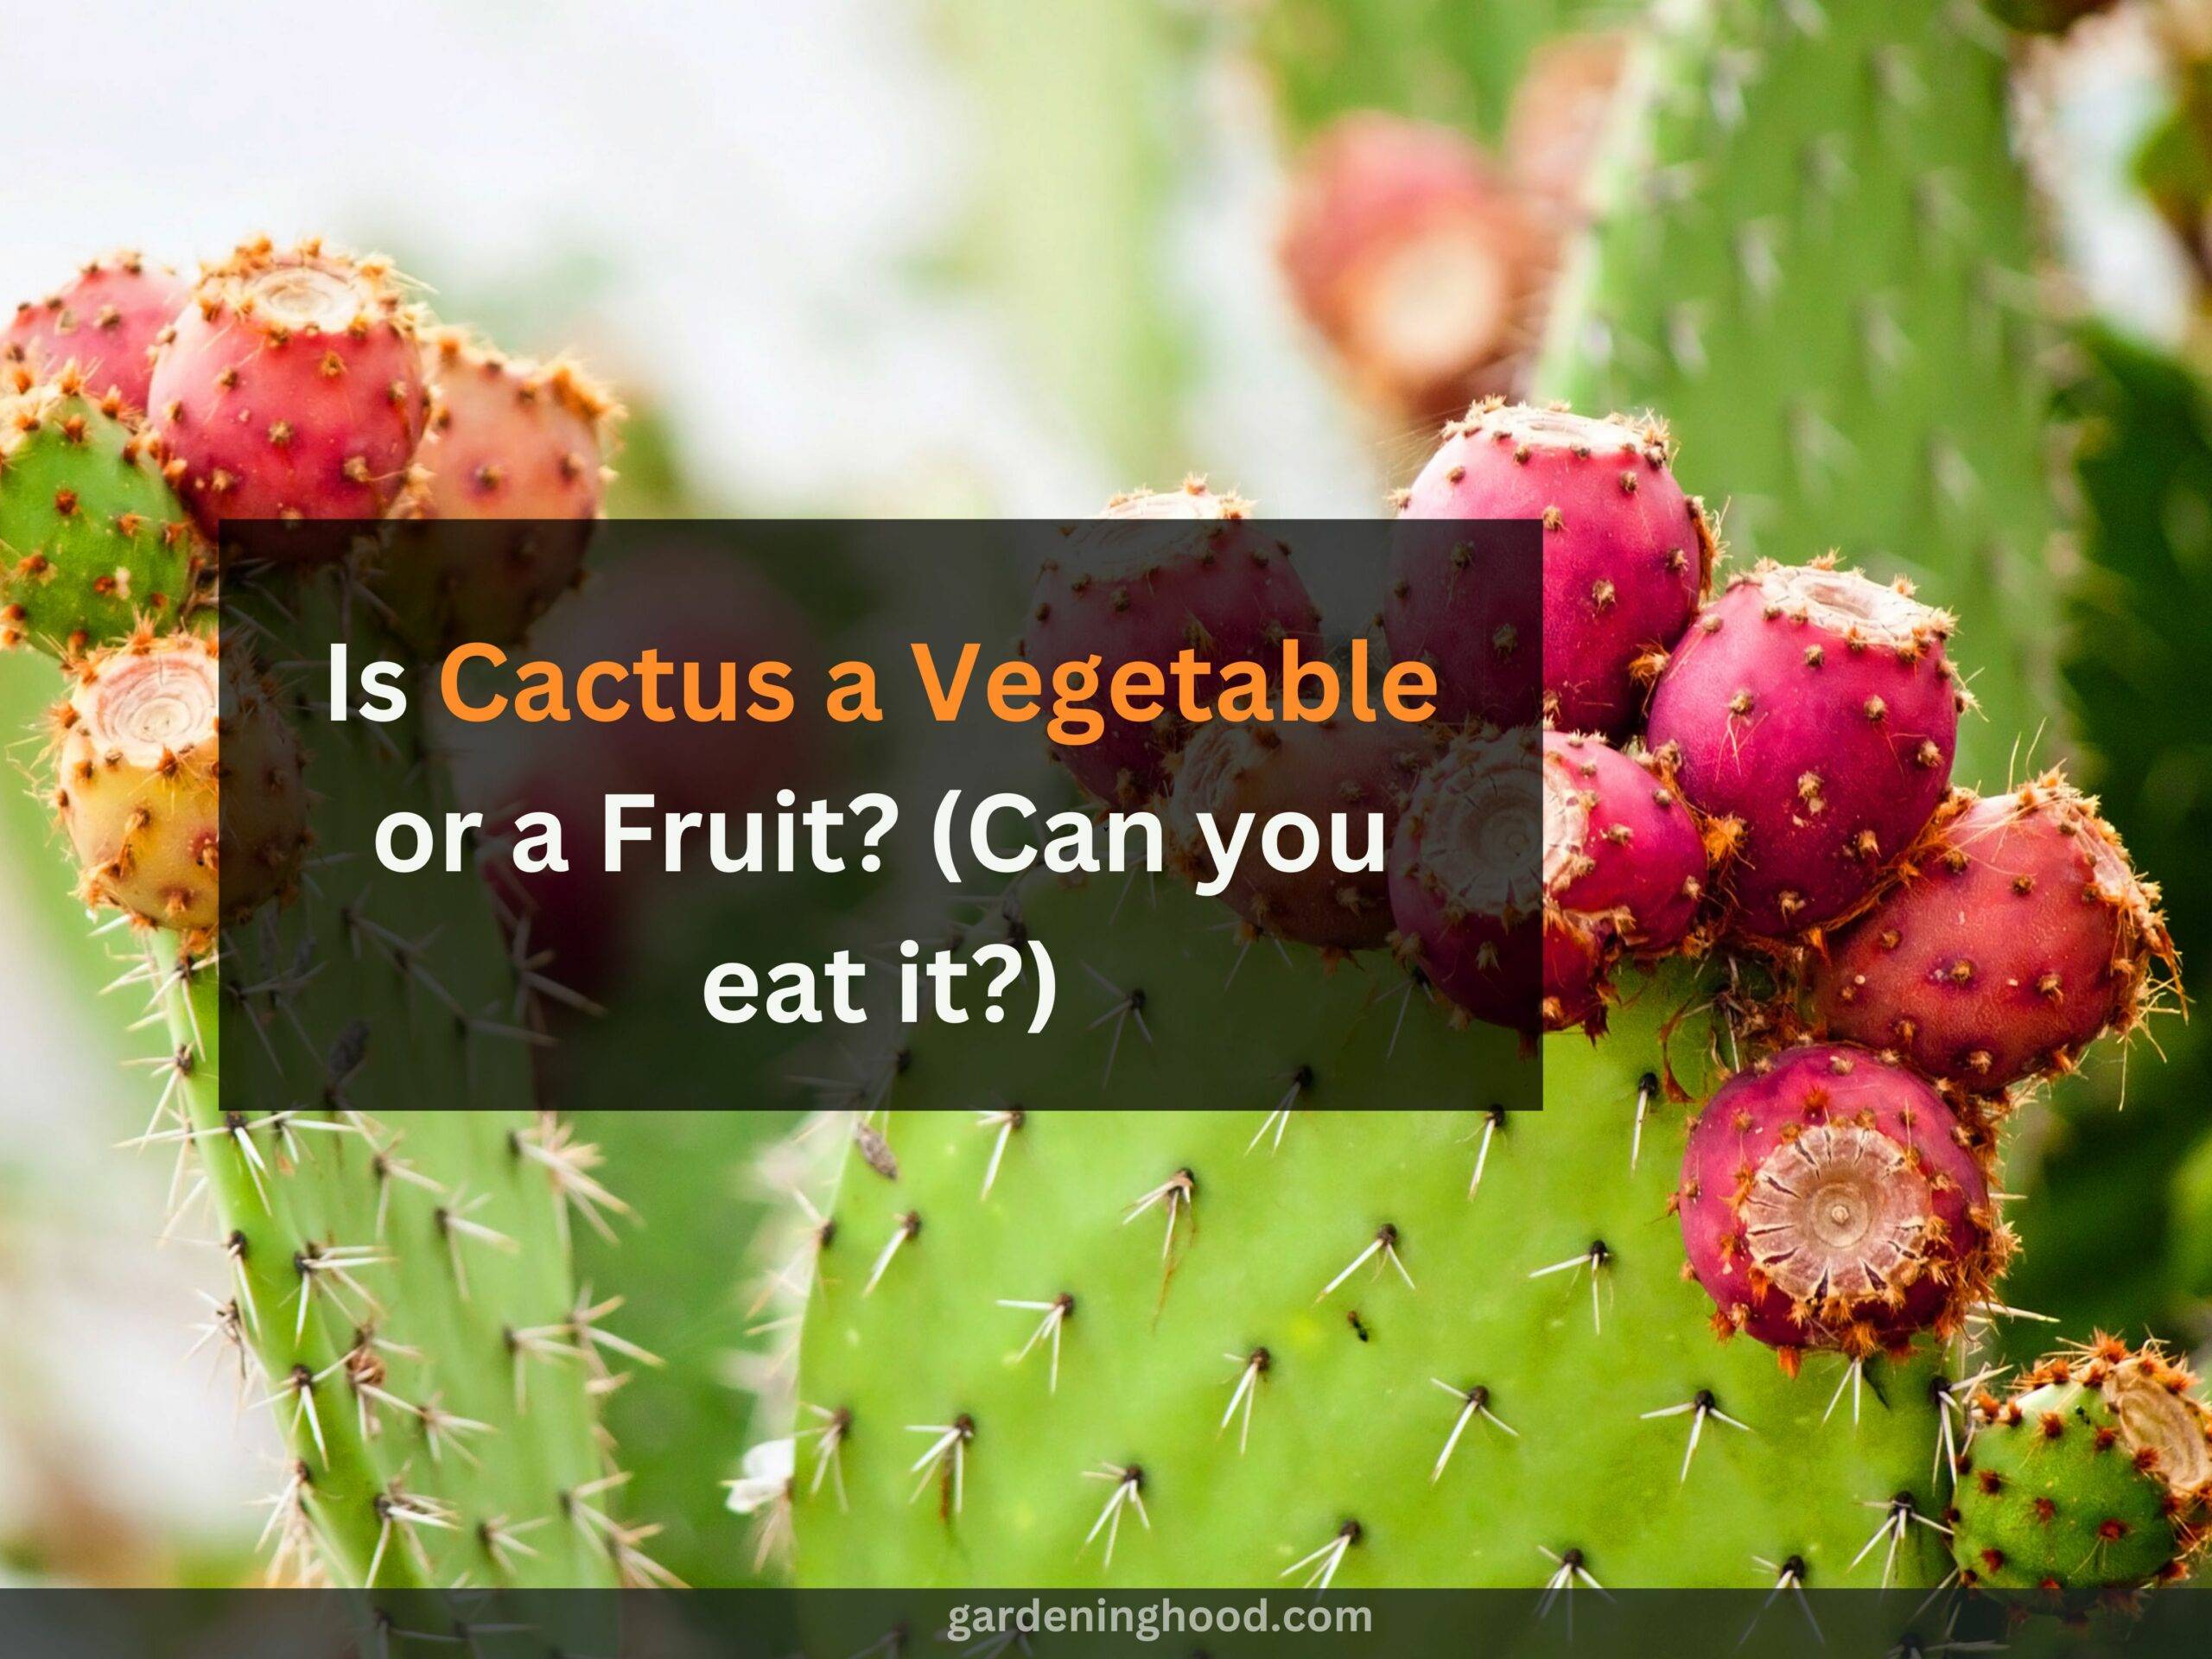 Is Cactus a Vegetable or a Fruit? (Can you eat it?)